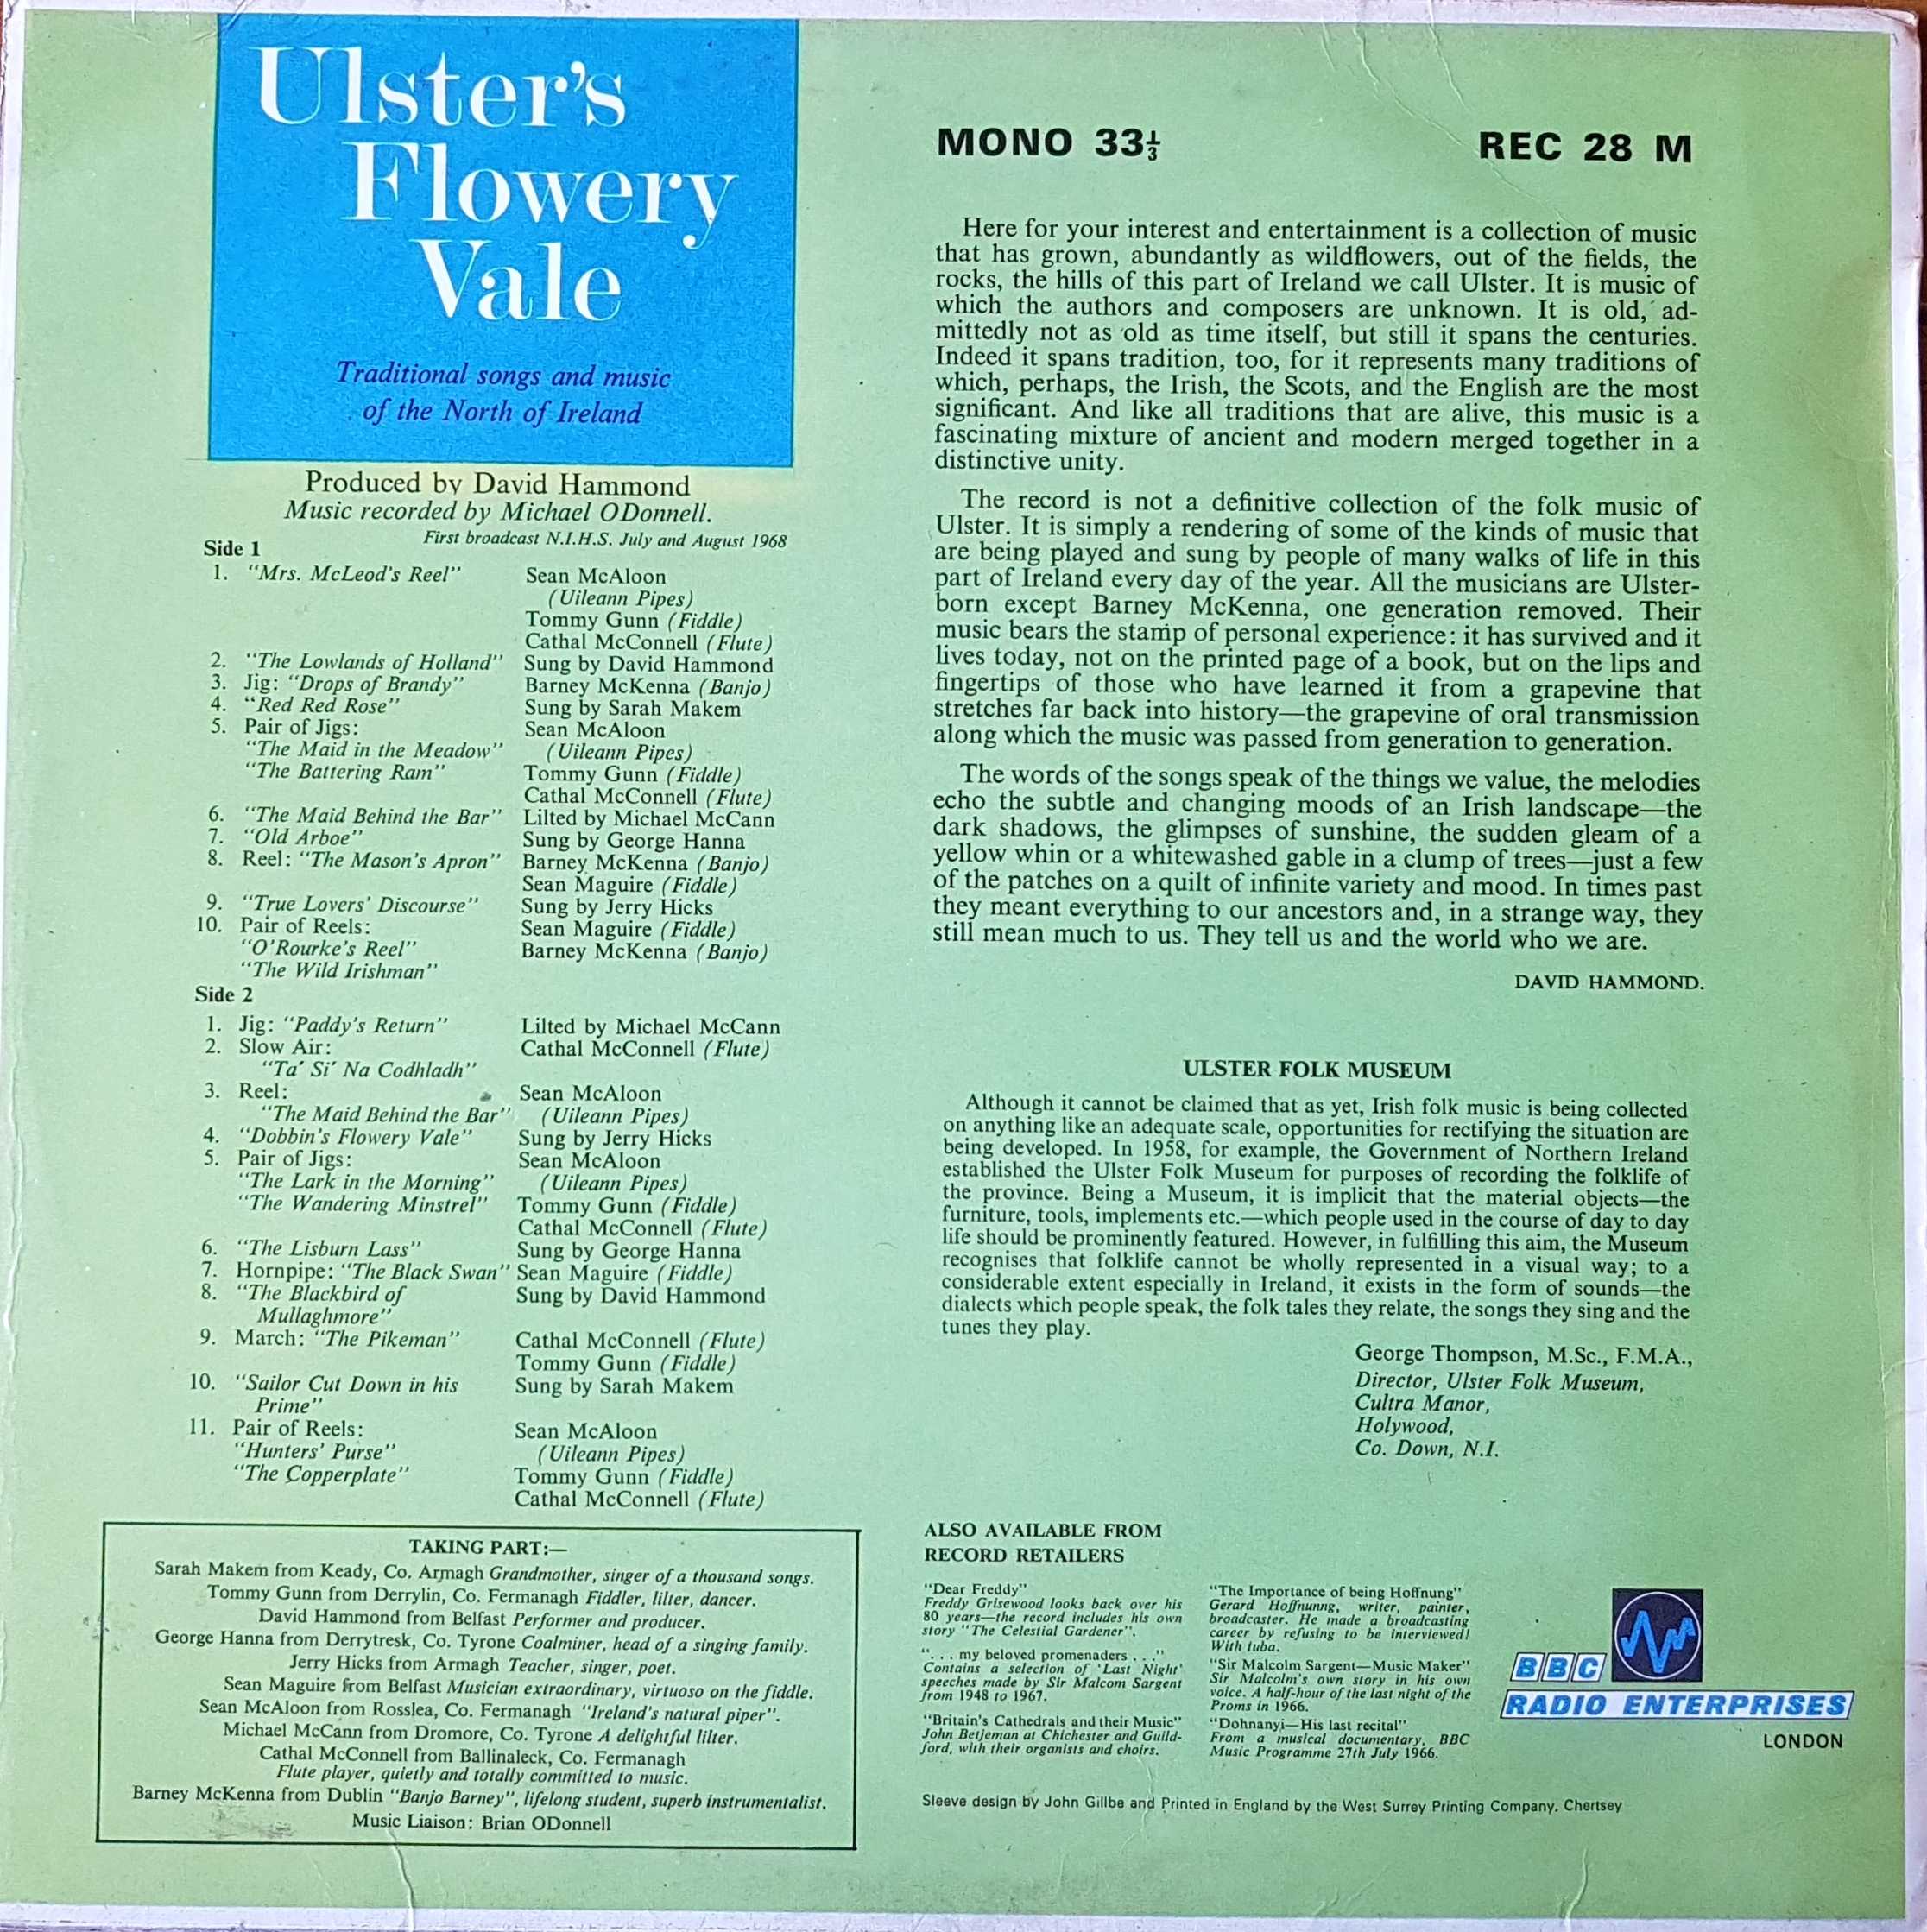 Picture of REC 28 Ulster's flowery vale (Songs and music From the North of Ireland) by artist Various from the BBC records and Tapes library